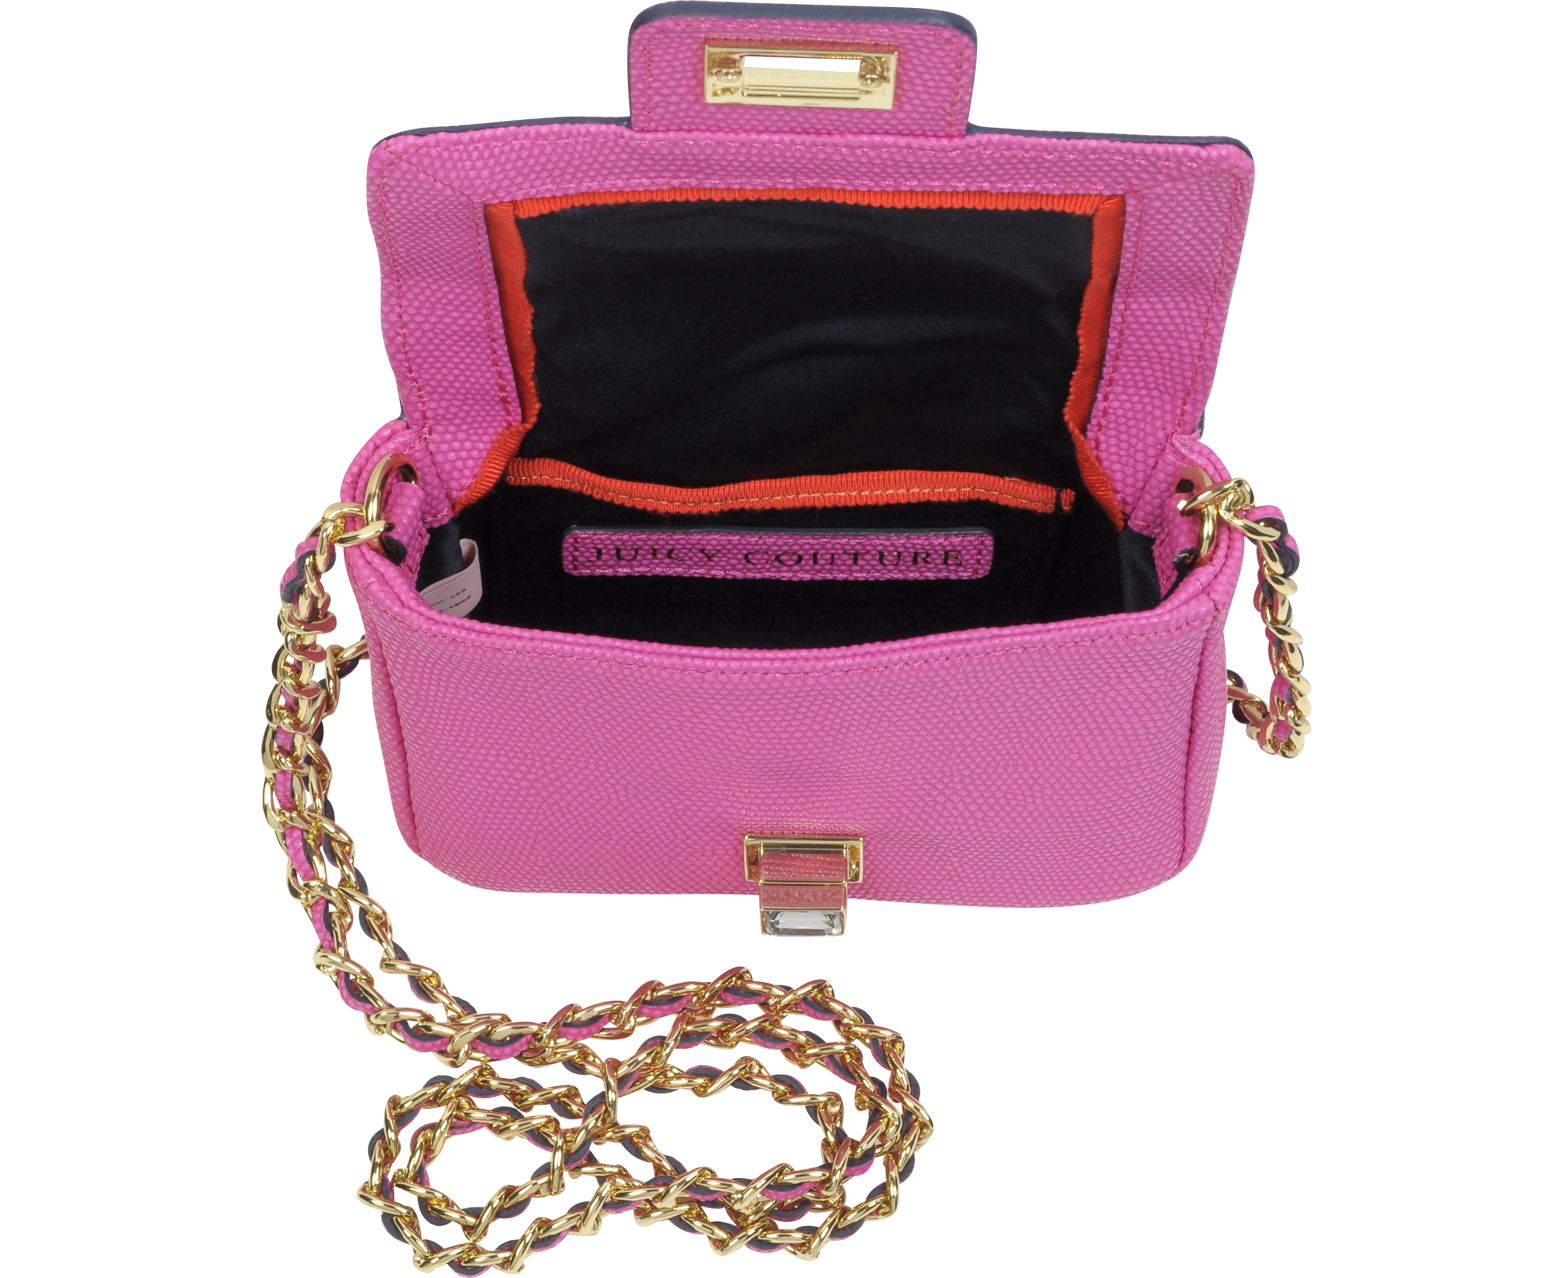 Juicy Couture Pink Bright Leather Mini G Shoulder Bag at FORZIERI